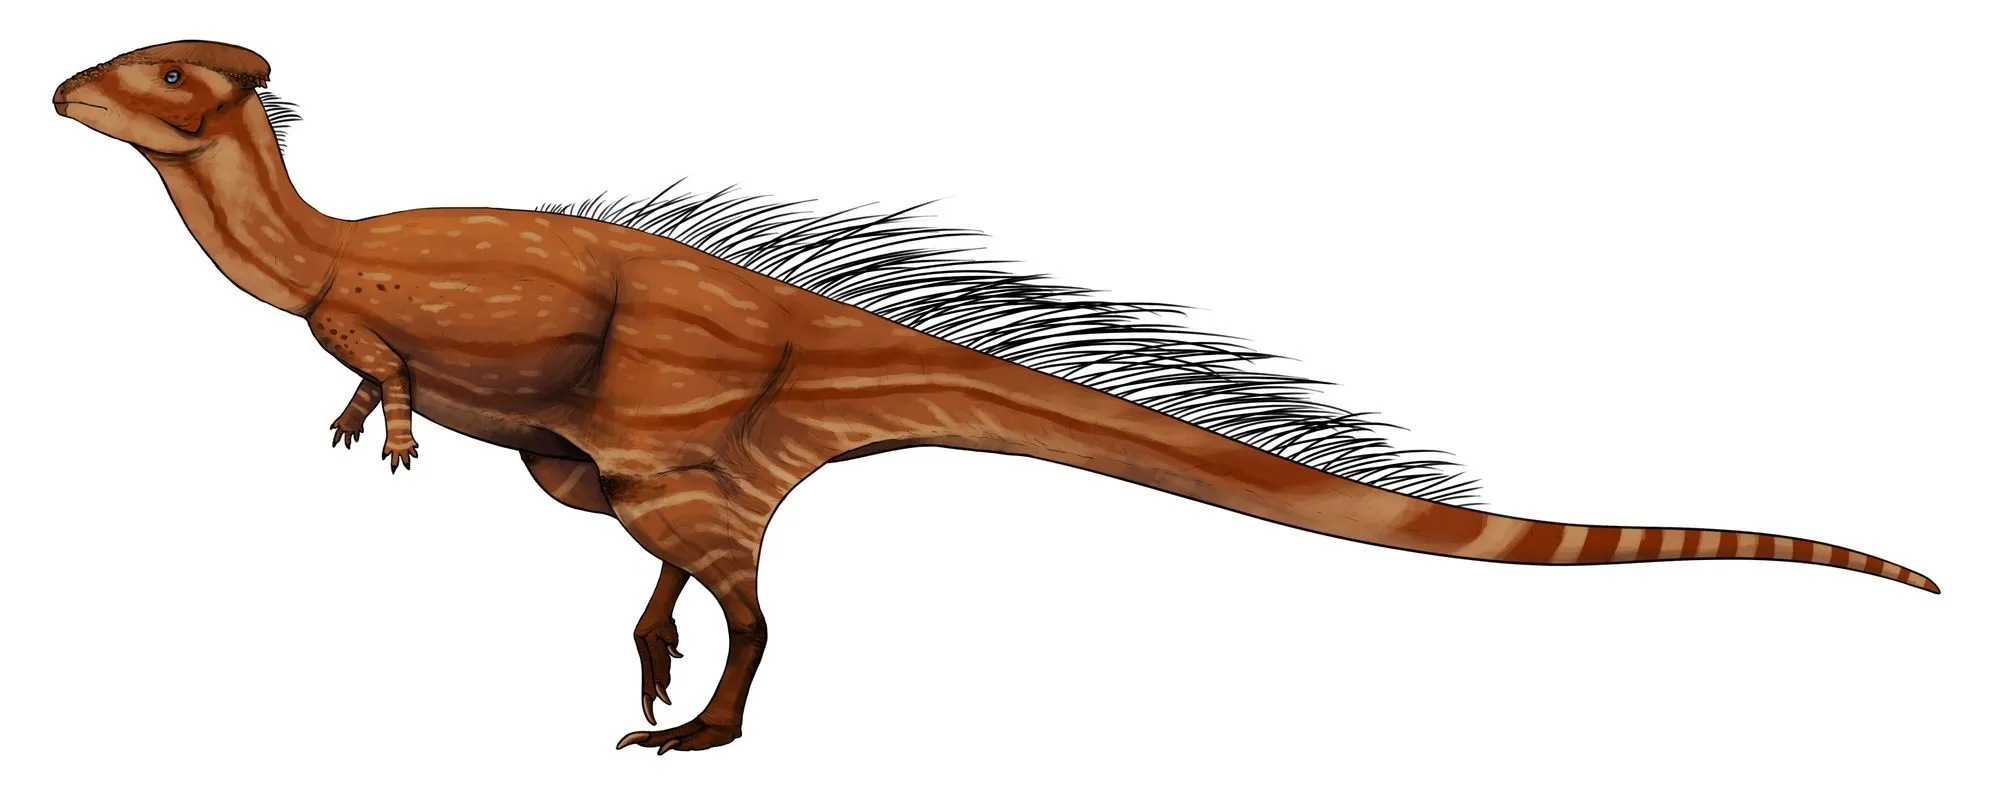 The Wannanosaurus appearance focuses on flat skulls with substantial lower parts of the body.